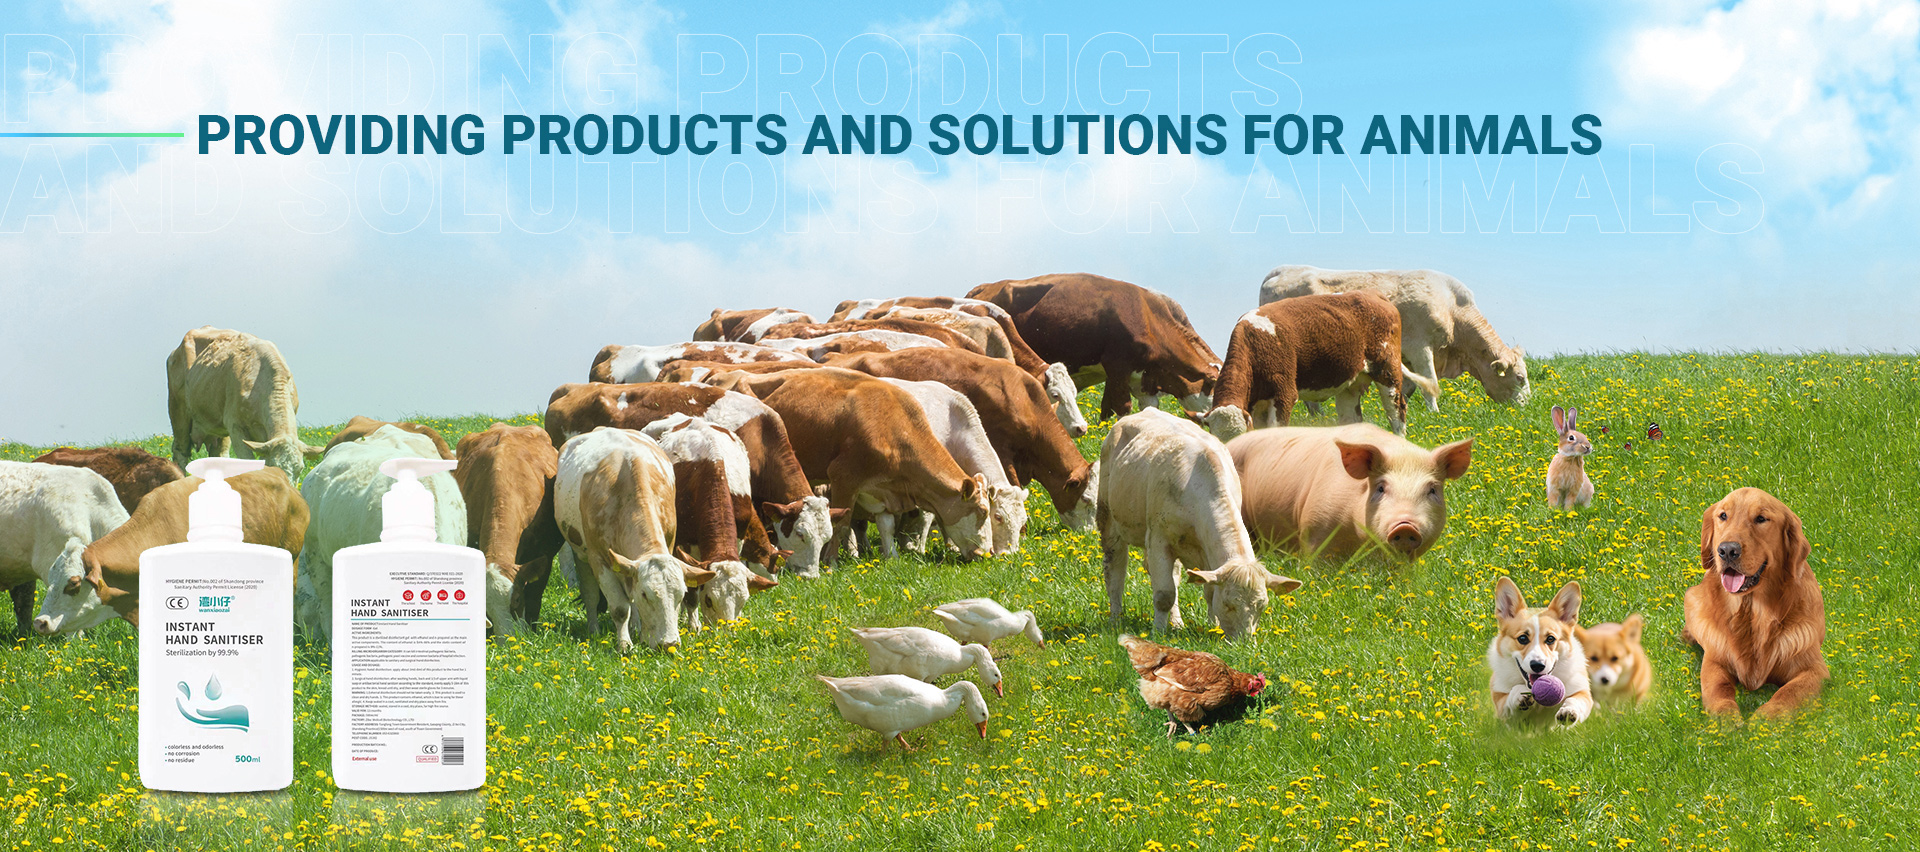 Providing products and solutions for animals